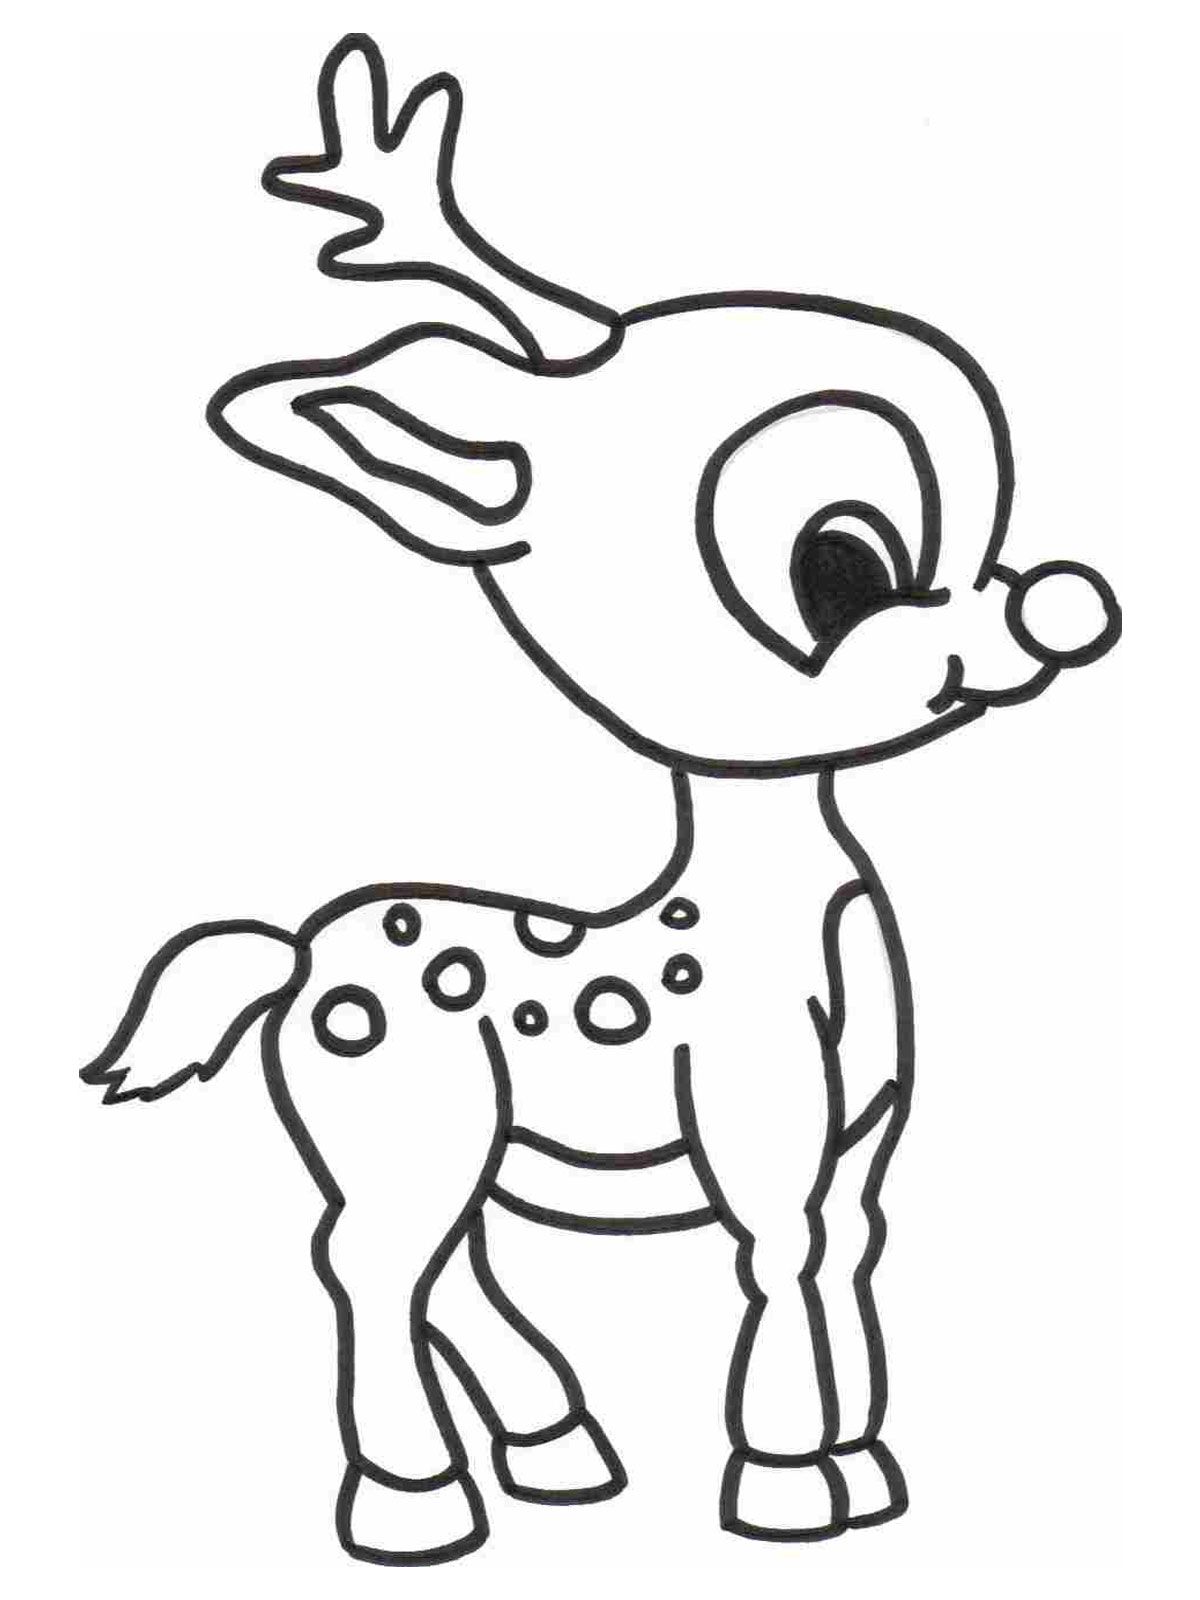 Baby Animal Coloring Pages For Girls   Coloring Pages For All Ages ...